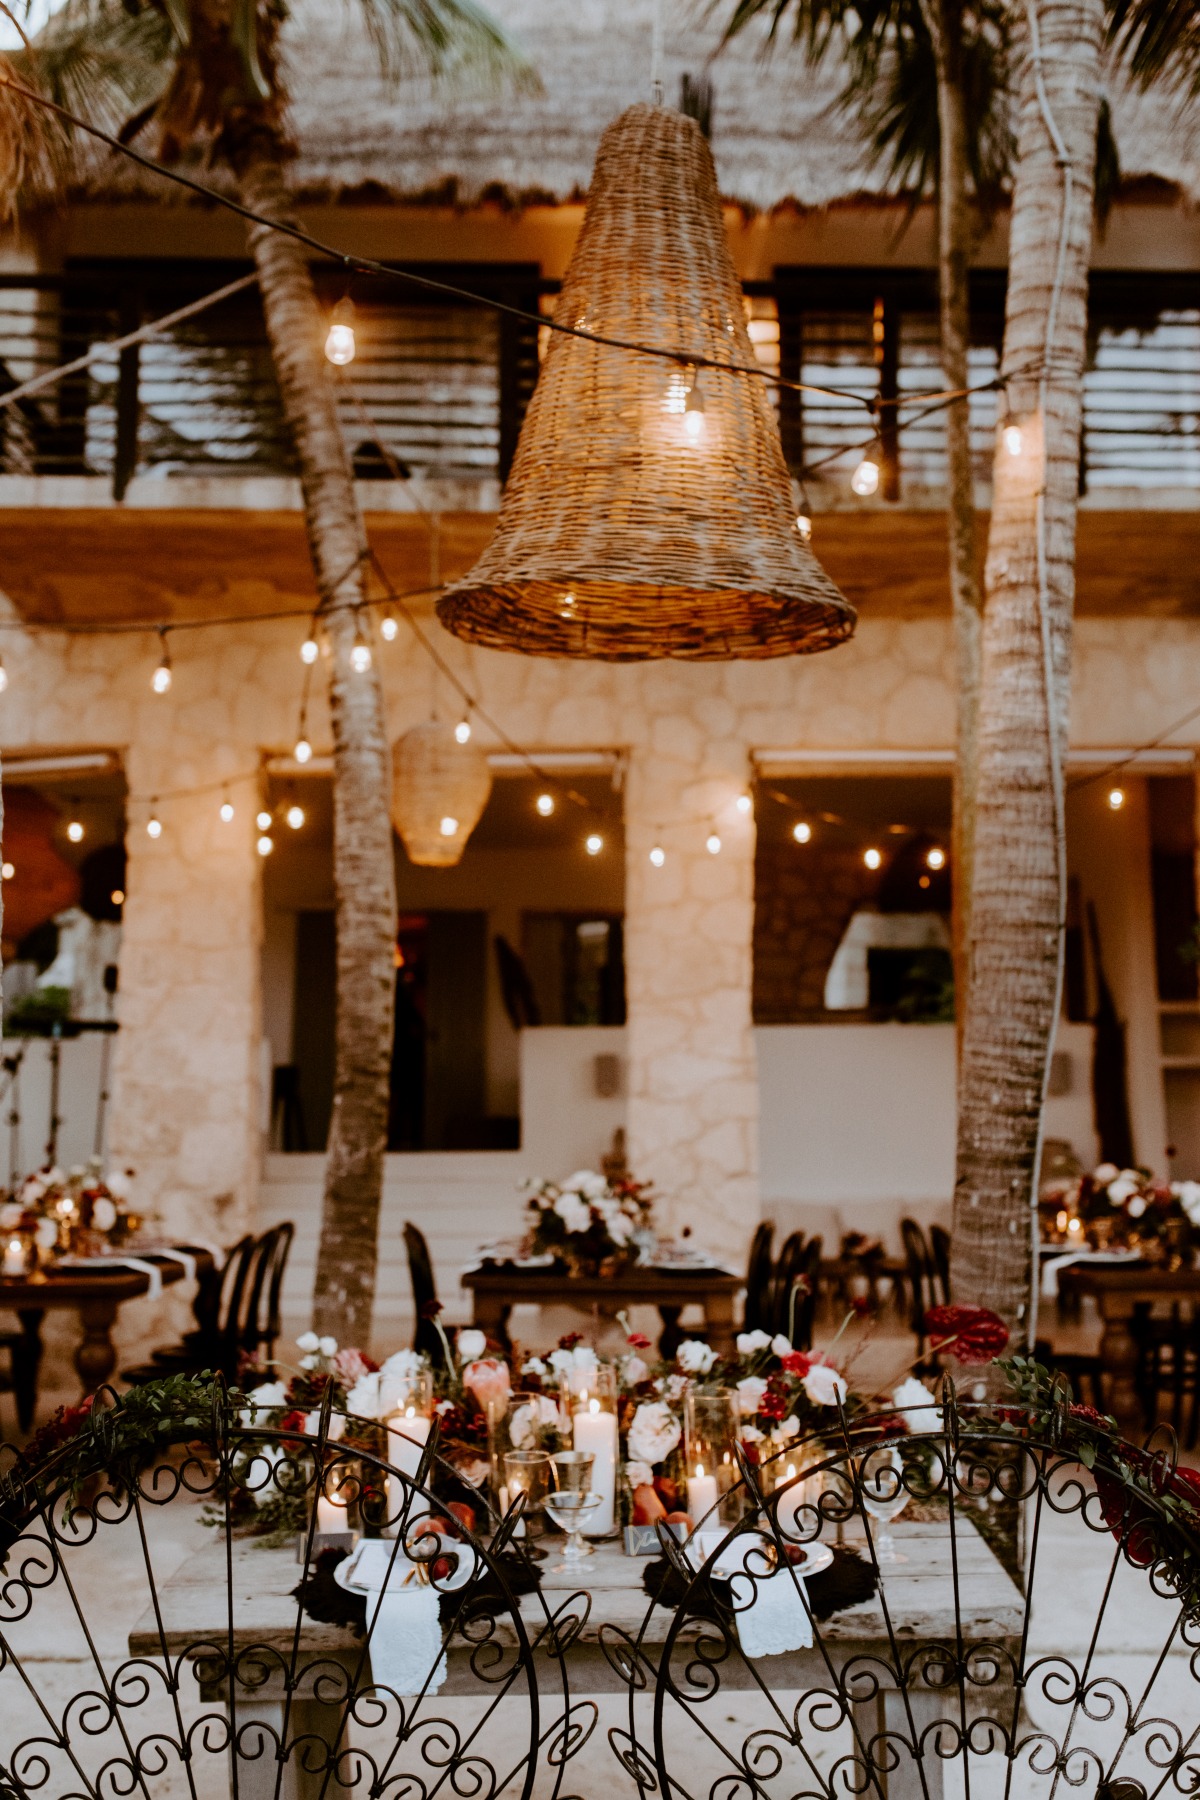 Can You Feel The Love, Tulum?